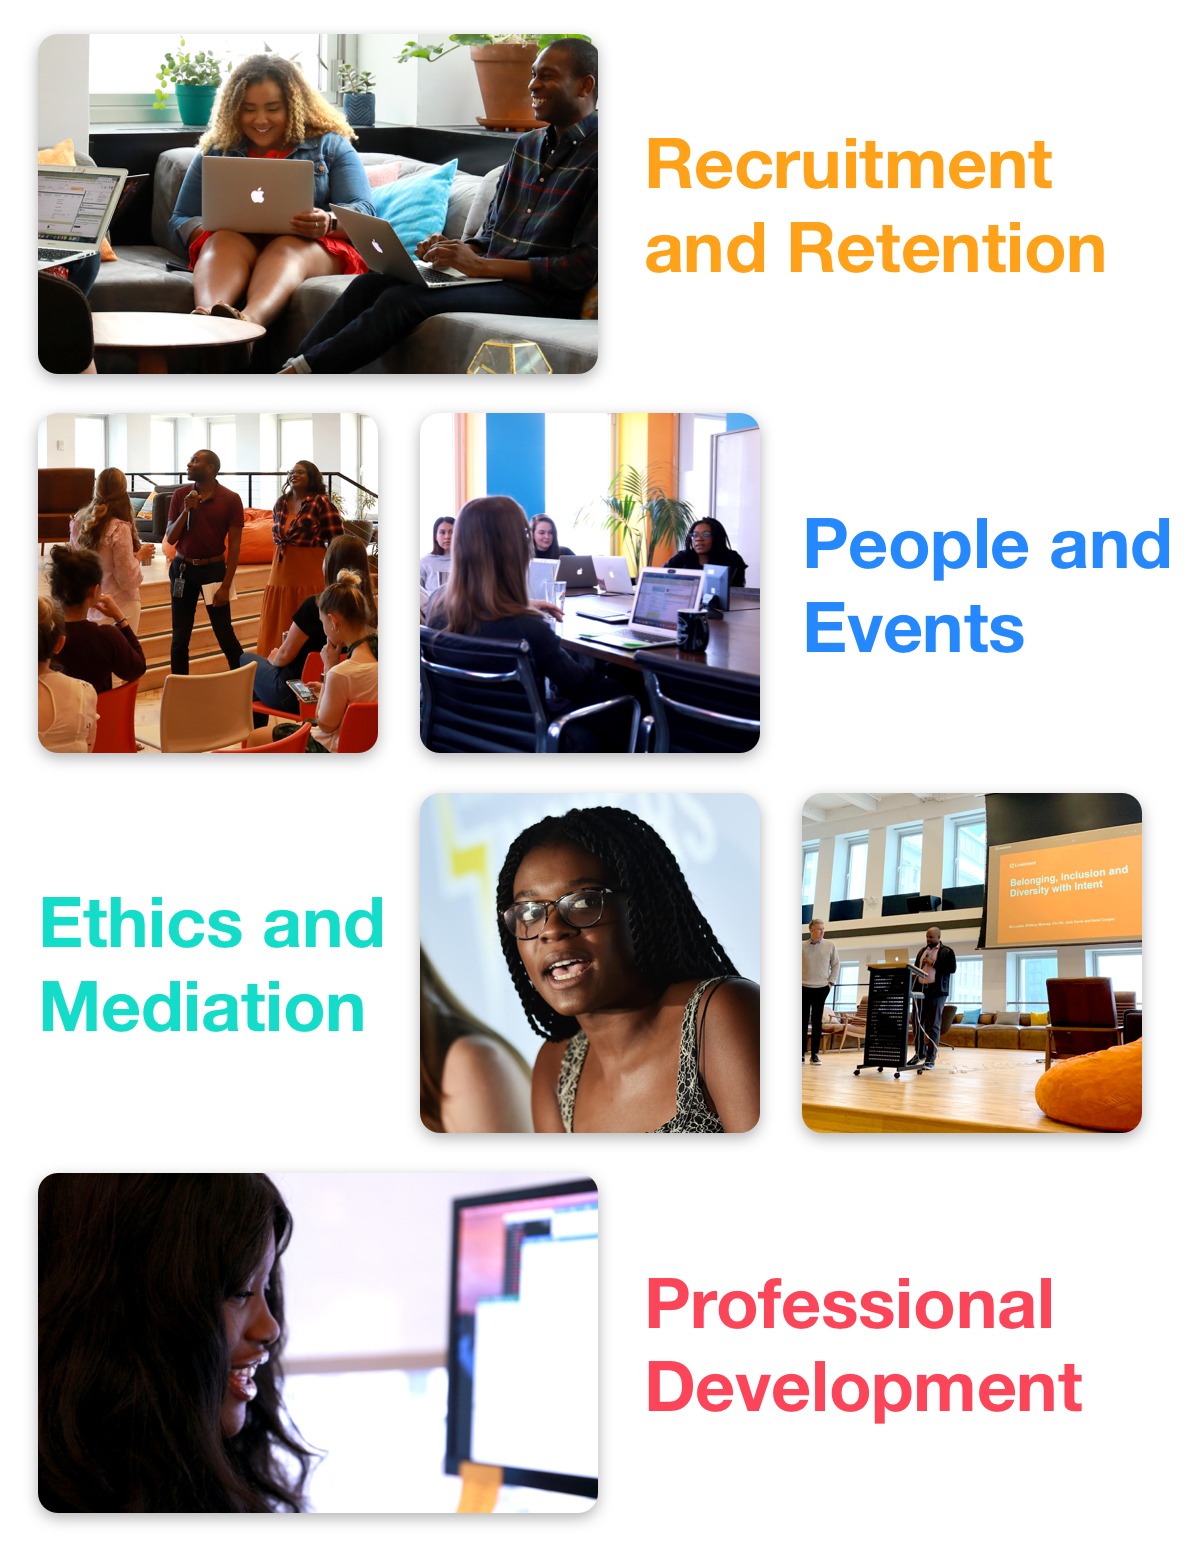 Recruitment and Retention, People and Events, Professional Development, Ethics and Mediation 